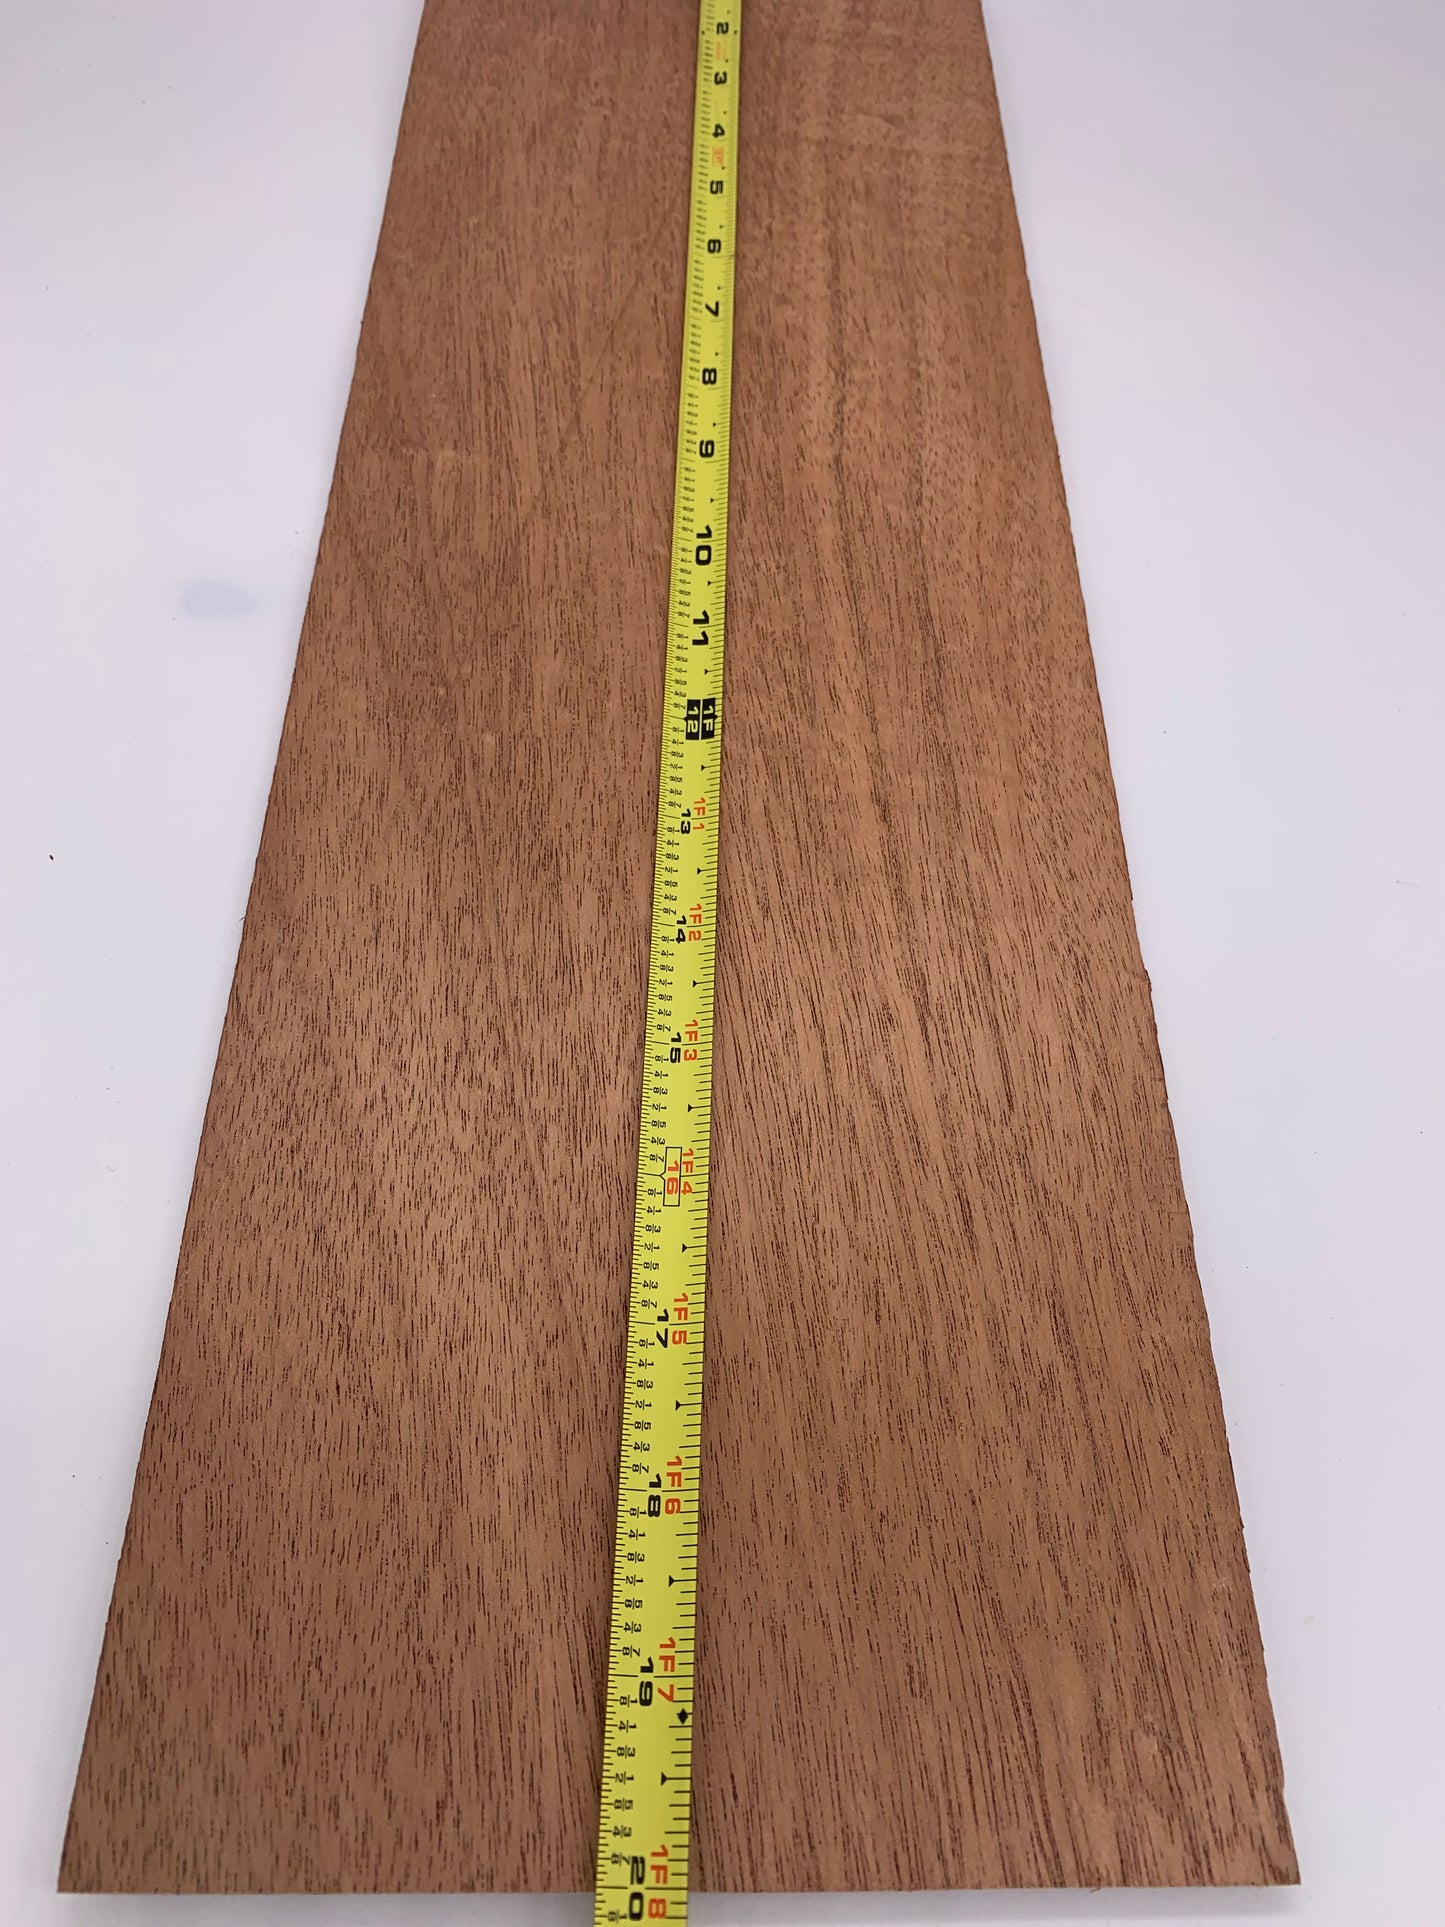 African Mahogany Hardwood, 1/8 thick, perfect for laser cutting.